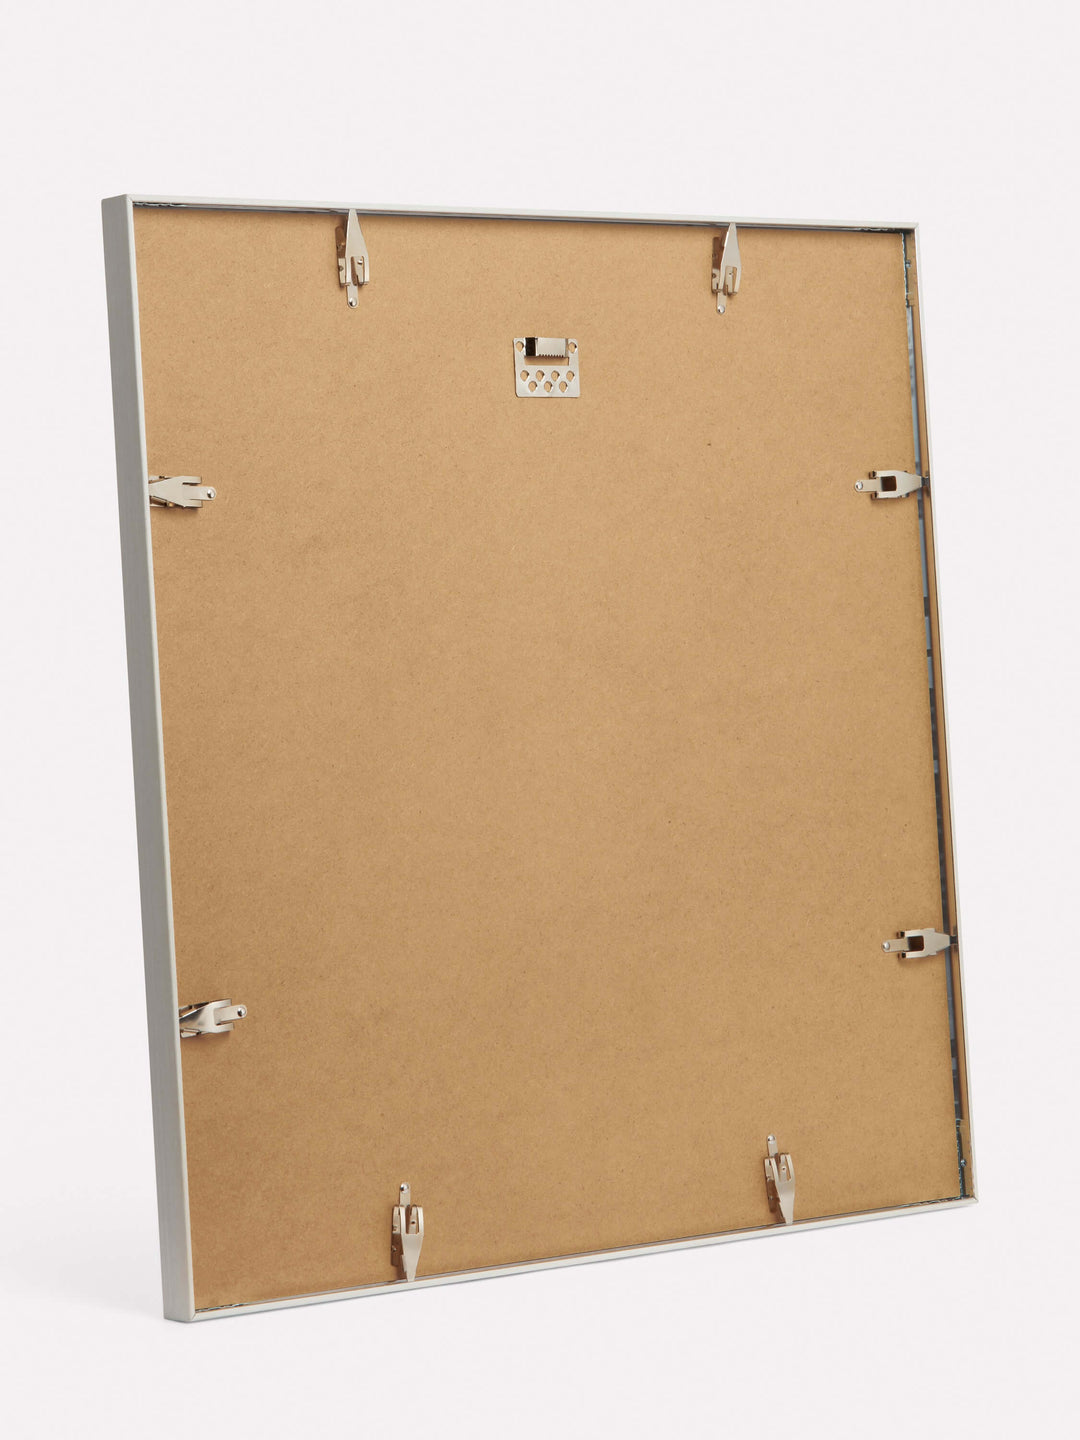 24x24-inch Thin Frame, White - Back view